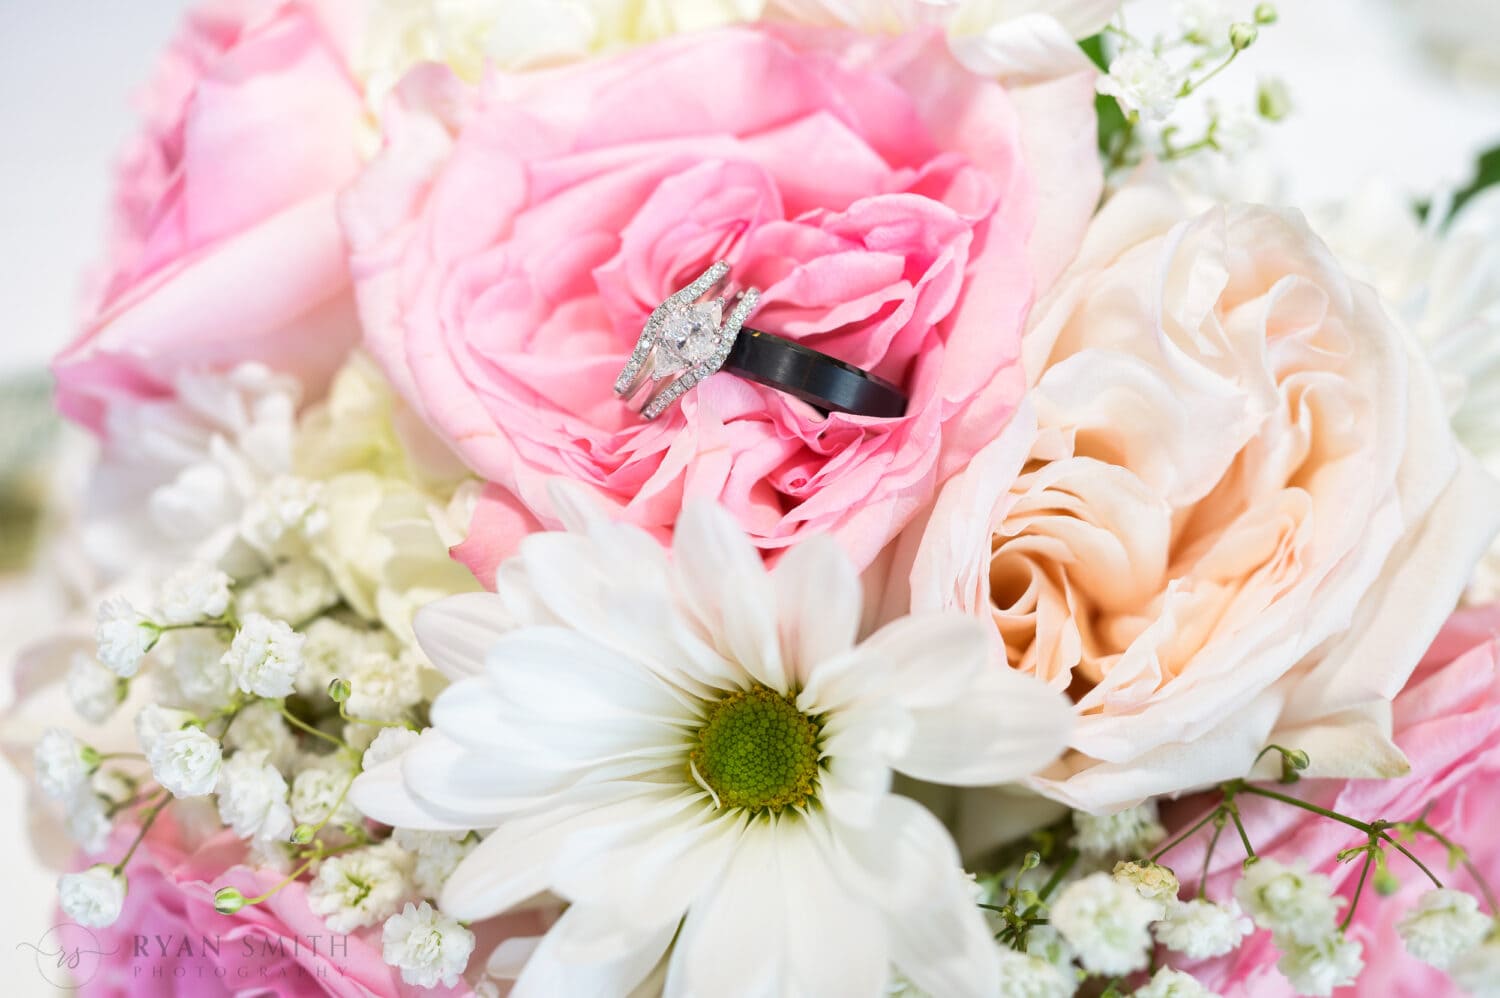 Bride and groom's rings on the flowers - Pawleys Plantation